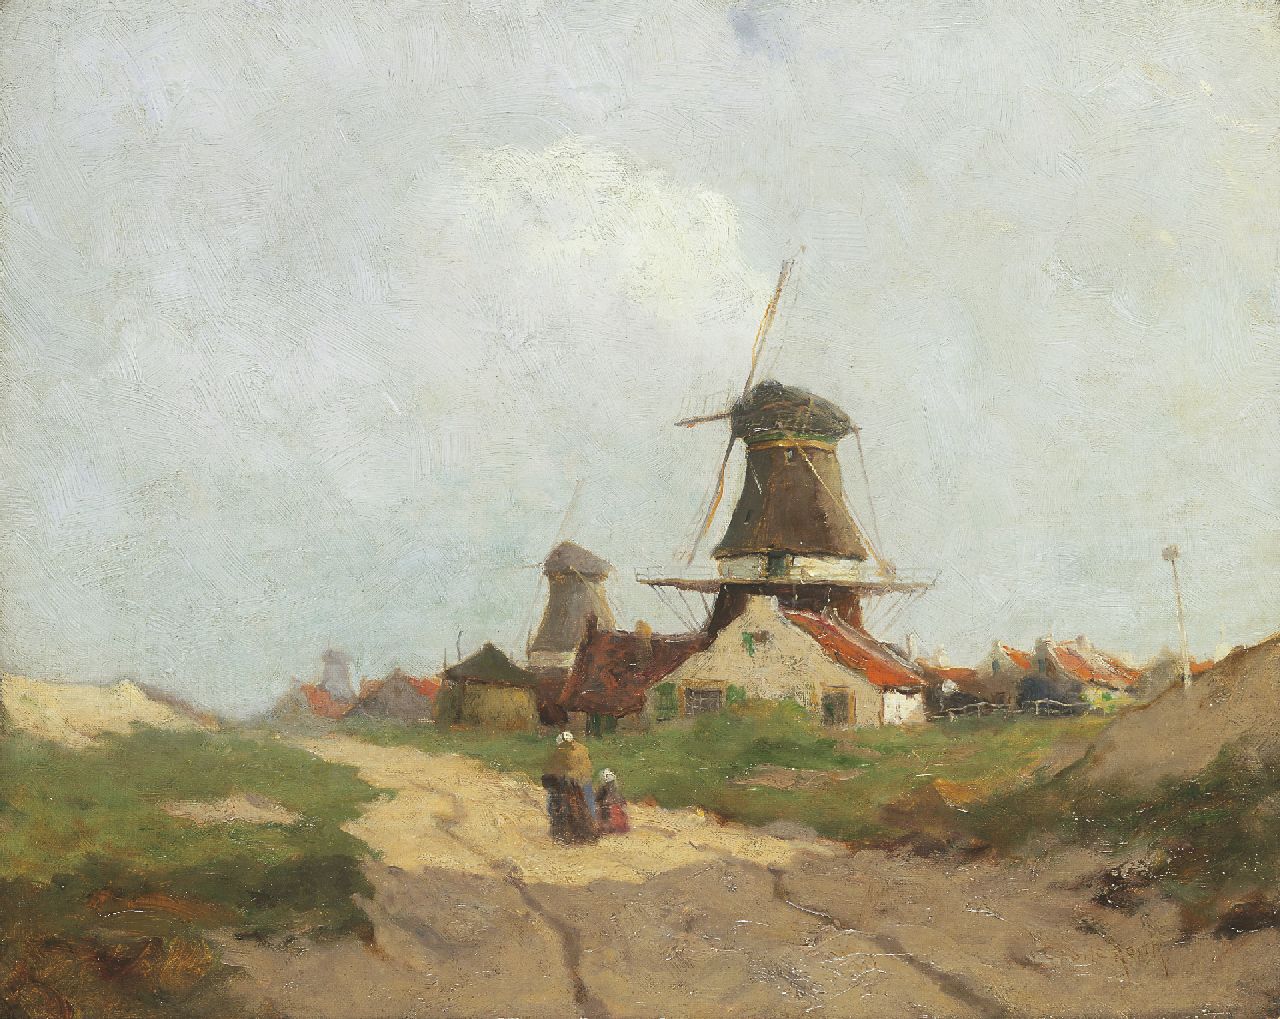 Castle Keith W.  | Walter Castle Keith, The windmills of Leidschendam, oil on canvas 40.6 x 50.8 cm, signed l.r.